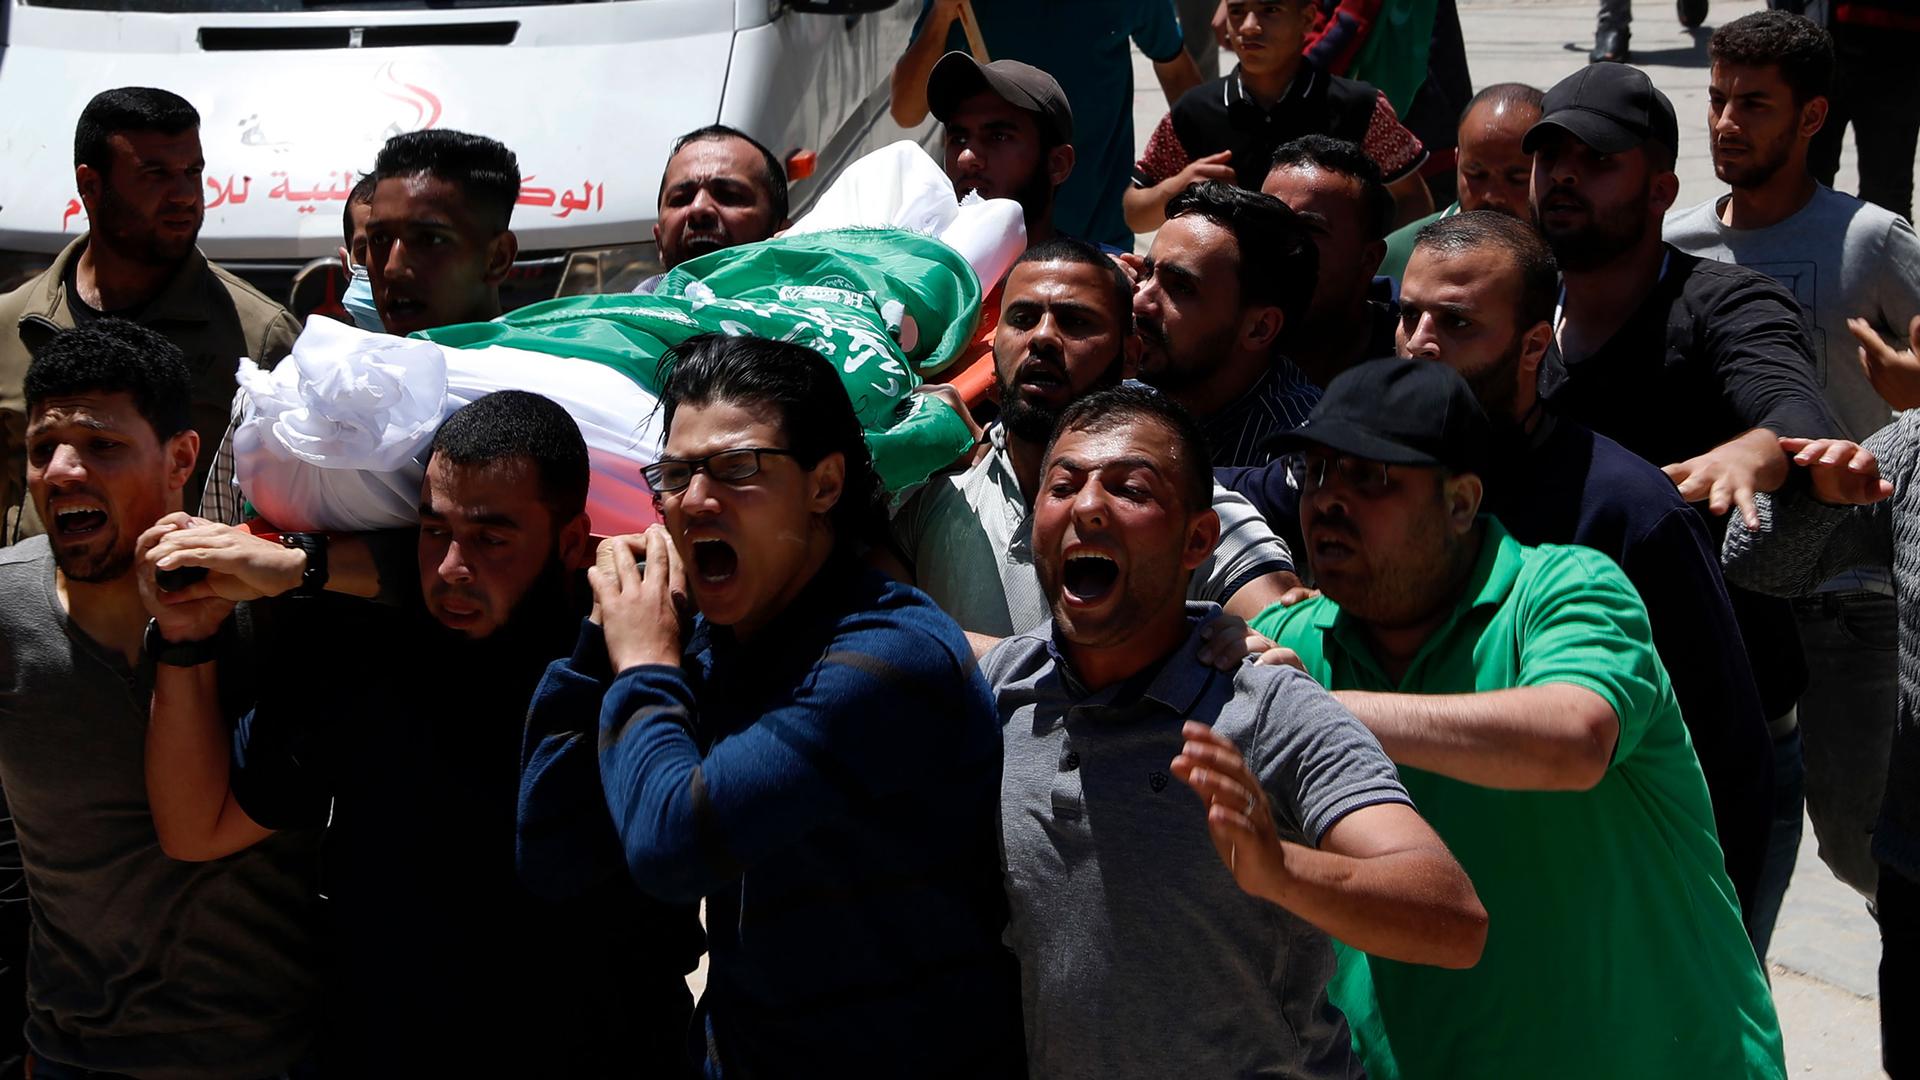 A group of people are shown carrying a body draped in white and the green flag of Hamas.